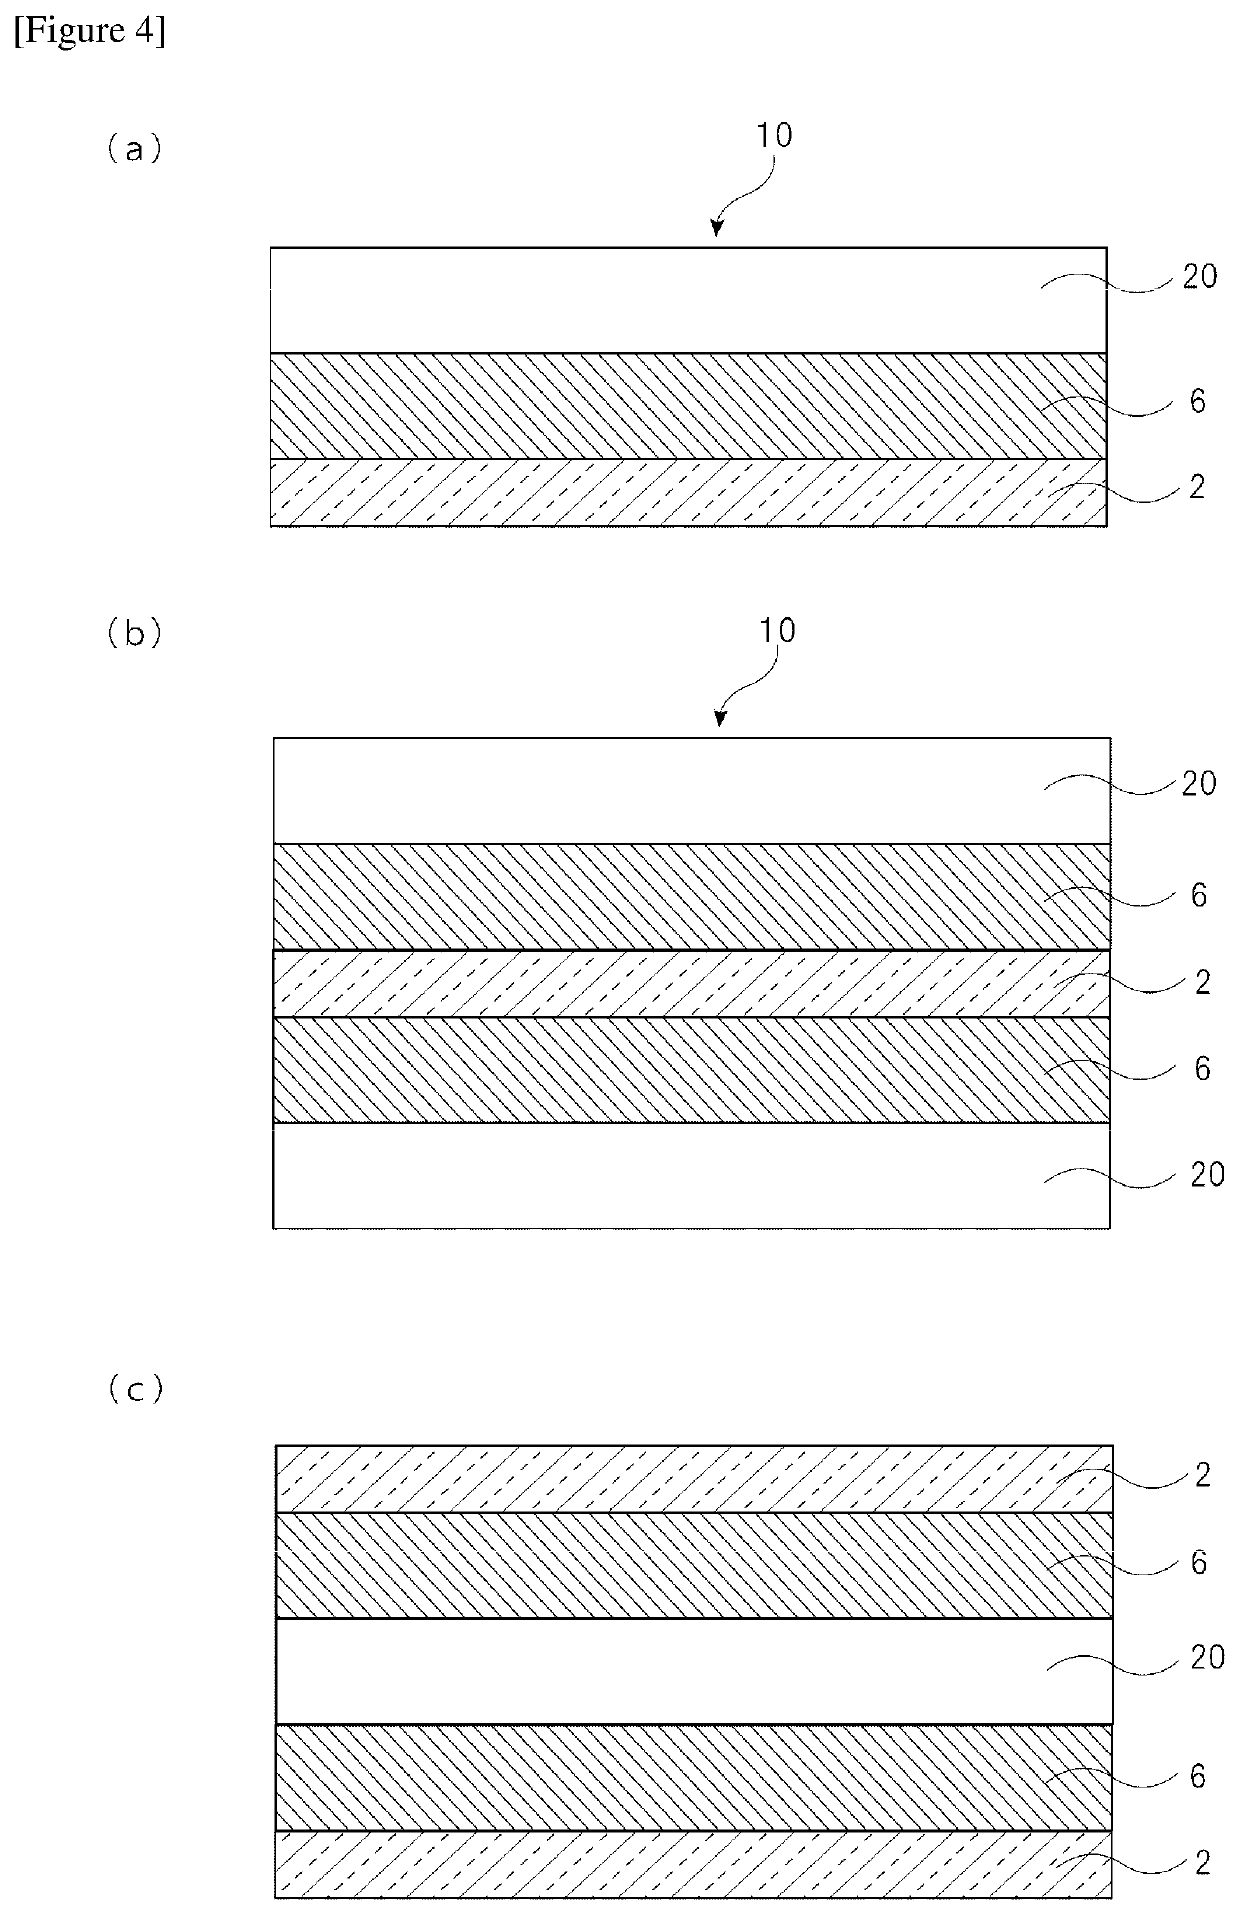 Laminate and method for producing laminate